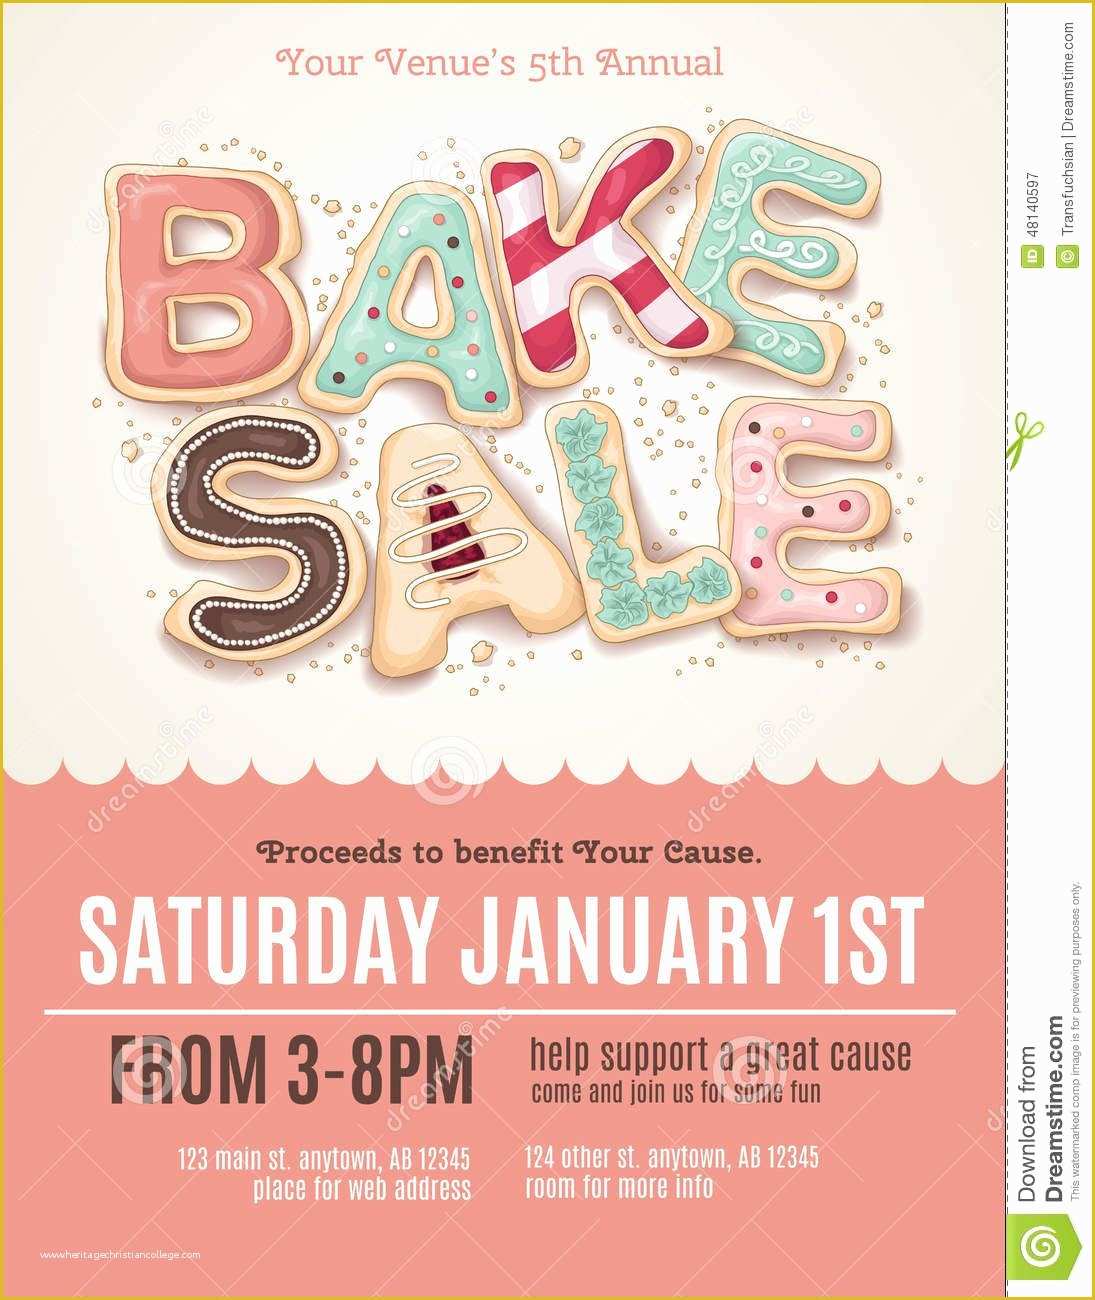 For Sale Flyer Template Free Download Of Fun Cookie Bake Sale Flyer Template Download From Over